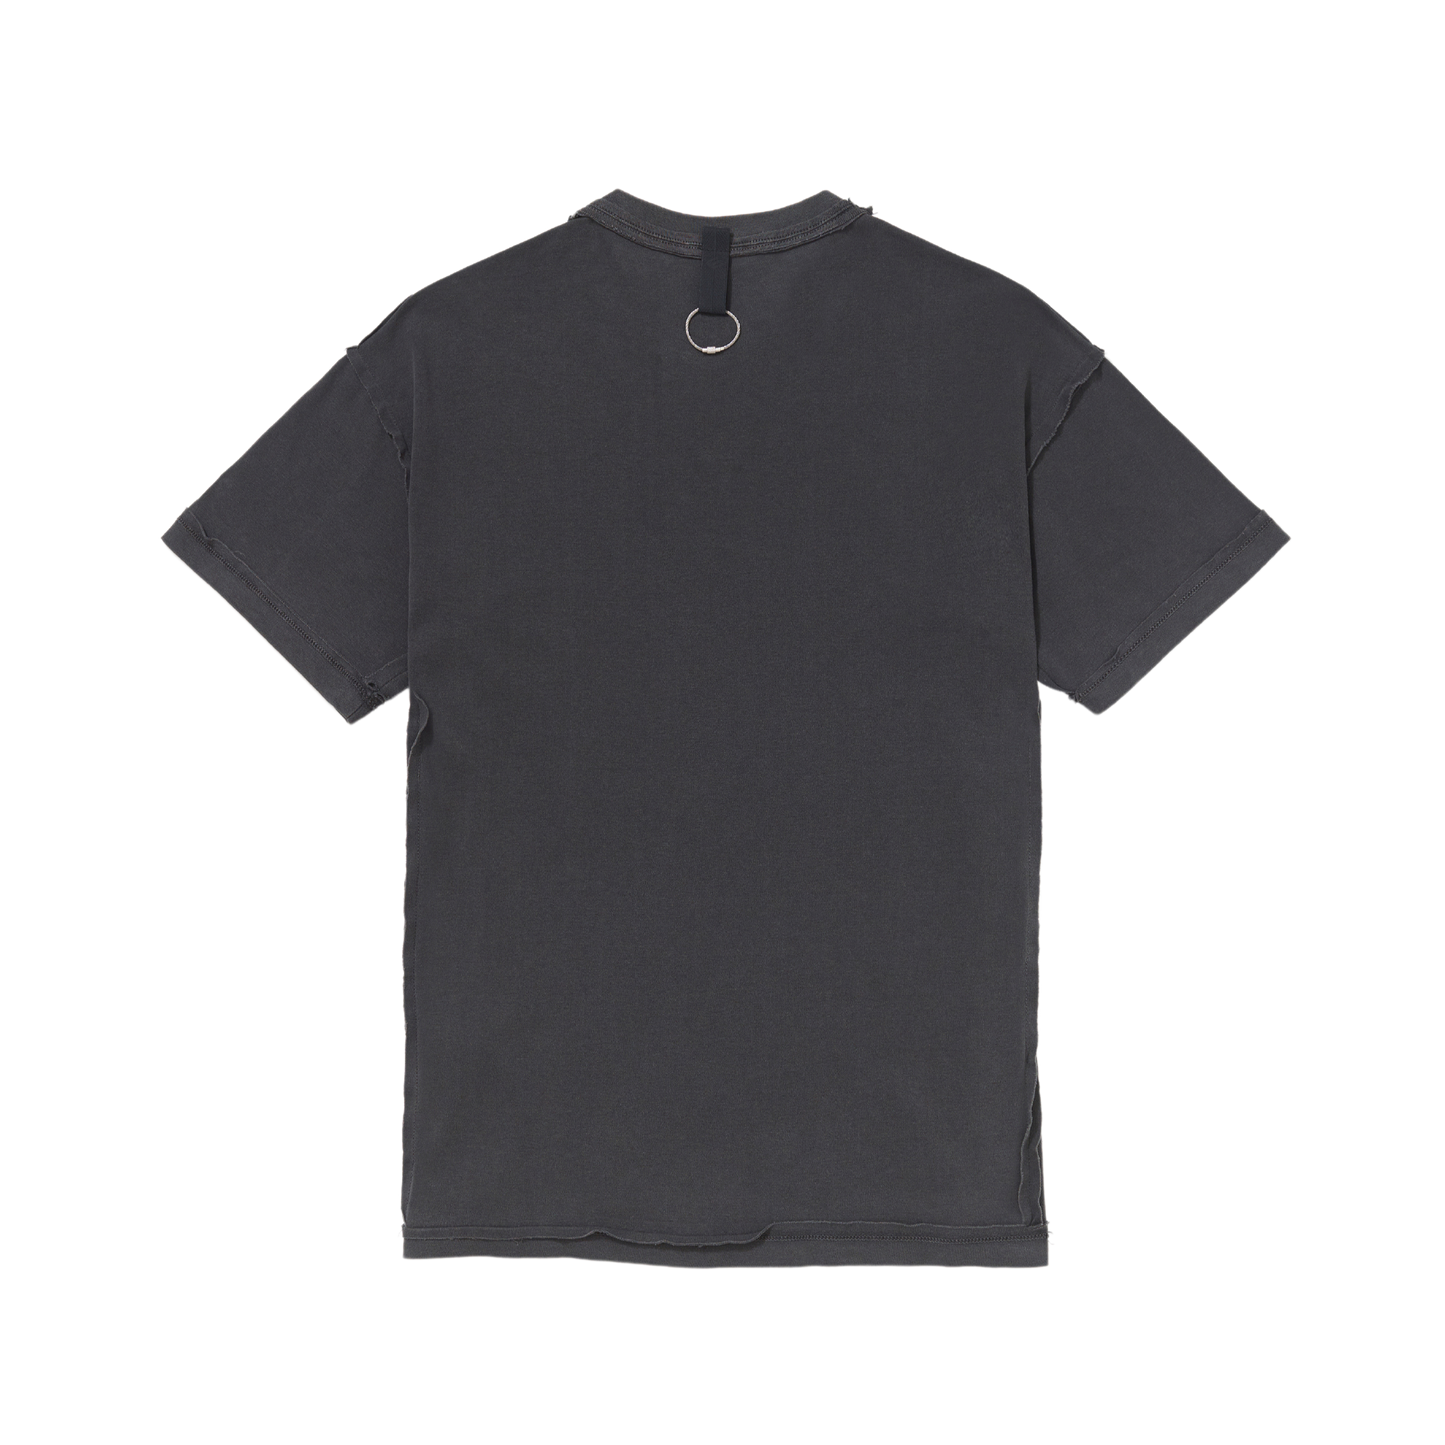 PACE - Pattern Tee "Grey" - THE GAME